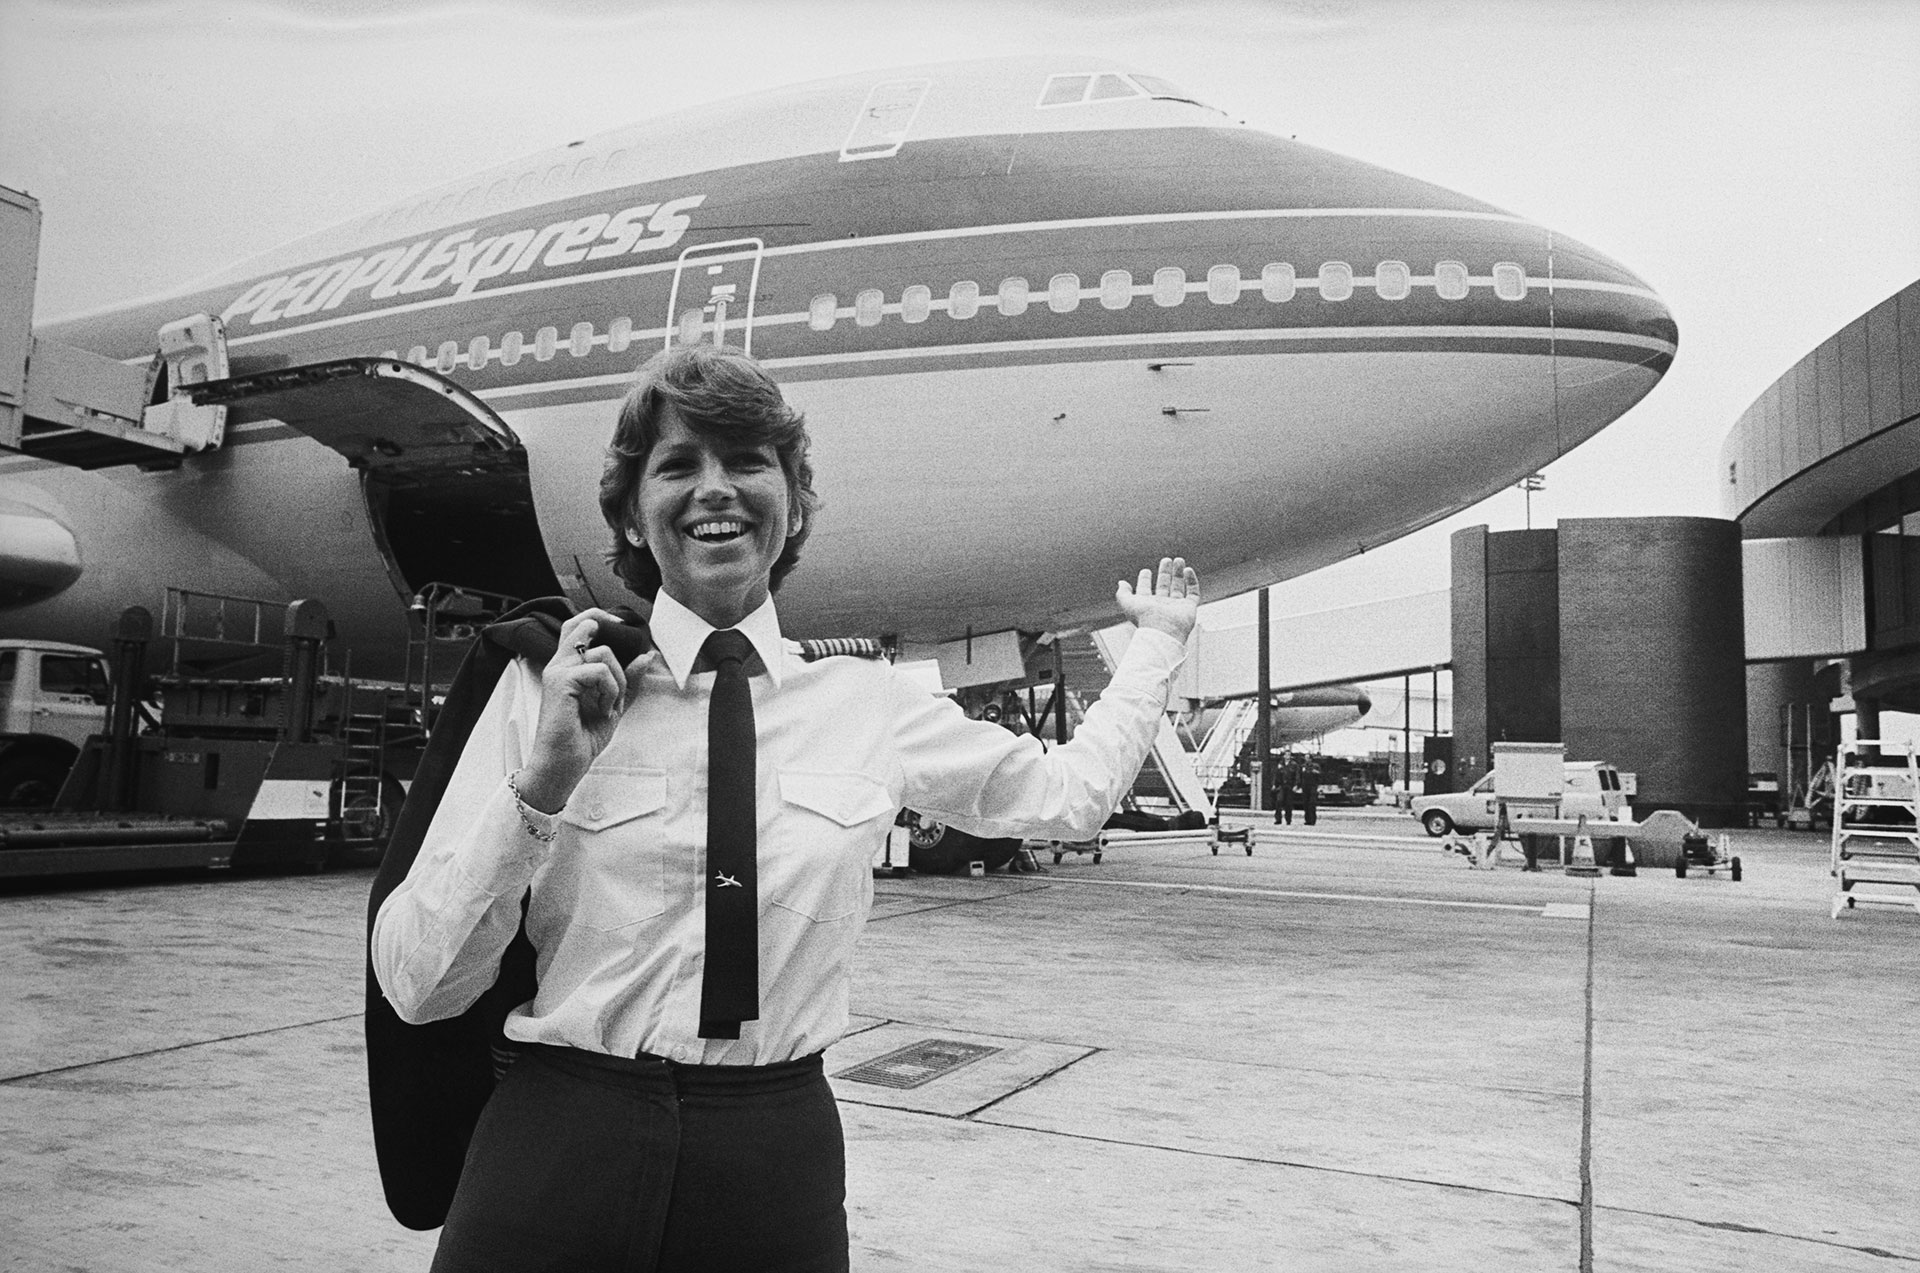 American pilot Lynn Rippelmeyer, the first woman to pilot a Boeing 747 across the Atlantic Ocean, in front of a PEOPLExpress plane, July 20, 1984. P. Shirley/Daily Express/Hulton Archive/Getty Images/Archive